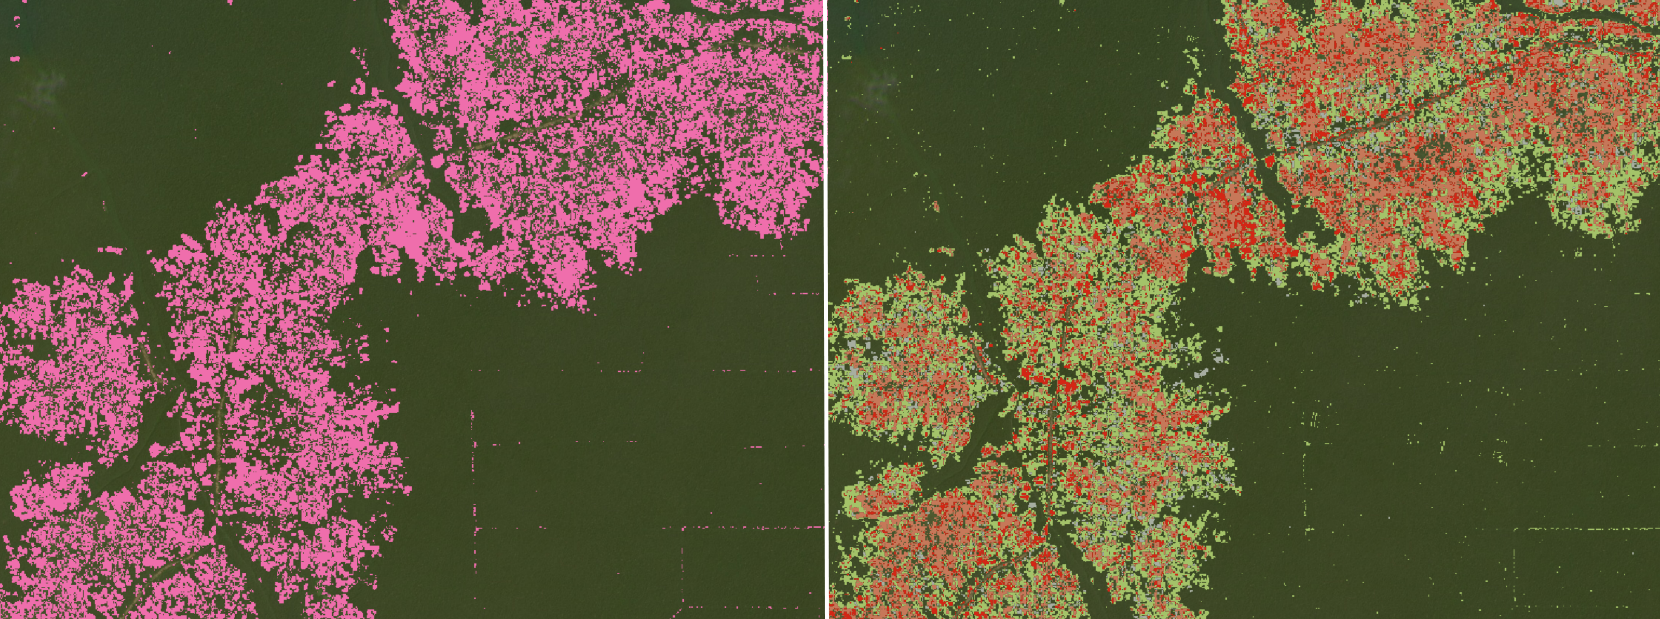 Side by side comparison of UMD tree cover loss and JRC Tropical Moist Forest data